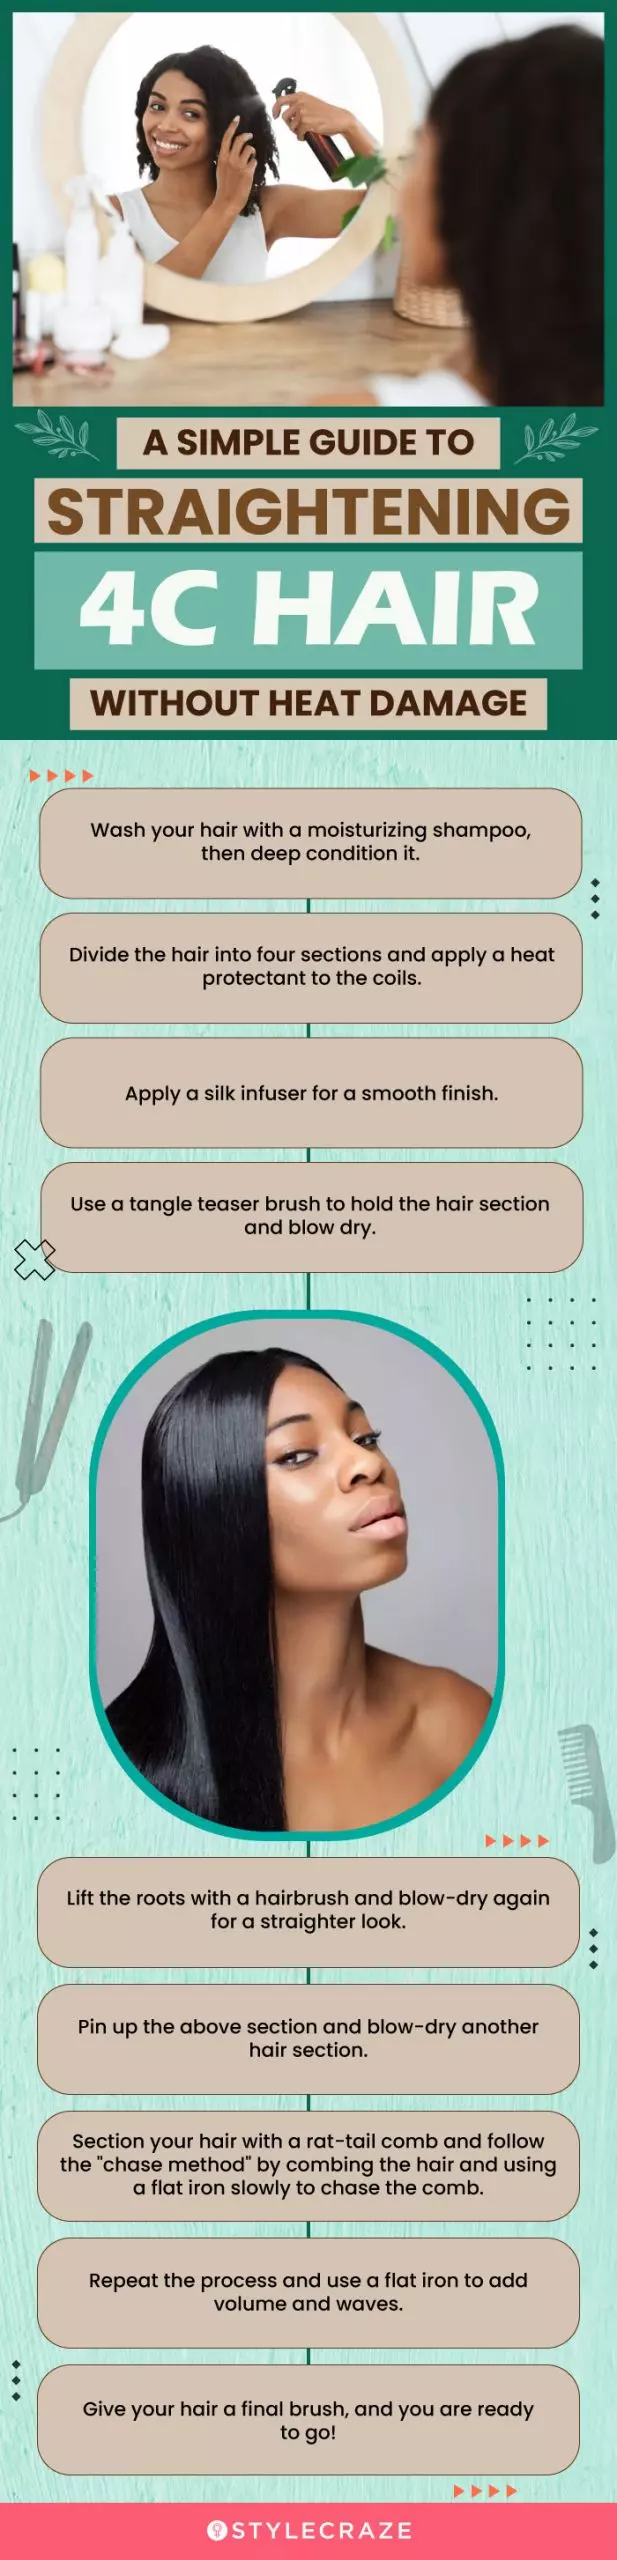 a simple guide to straightening 4c hair without heat damage (infographic)